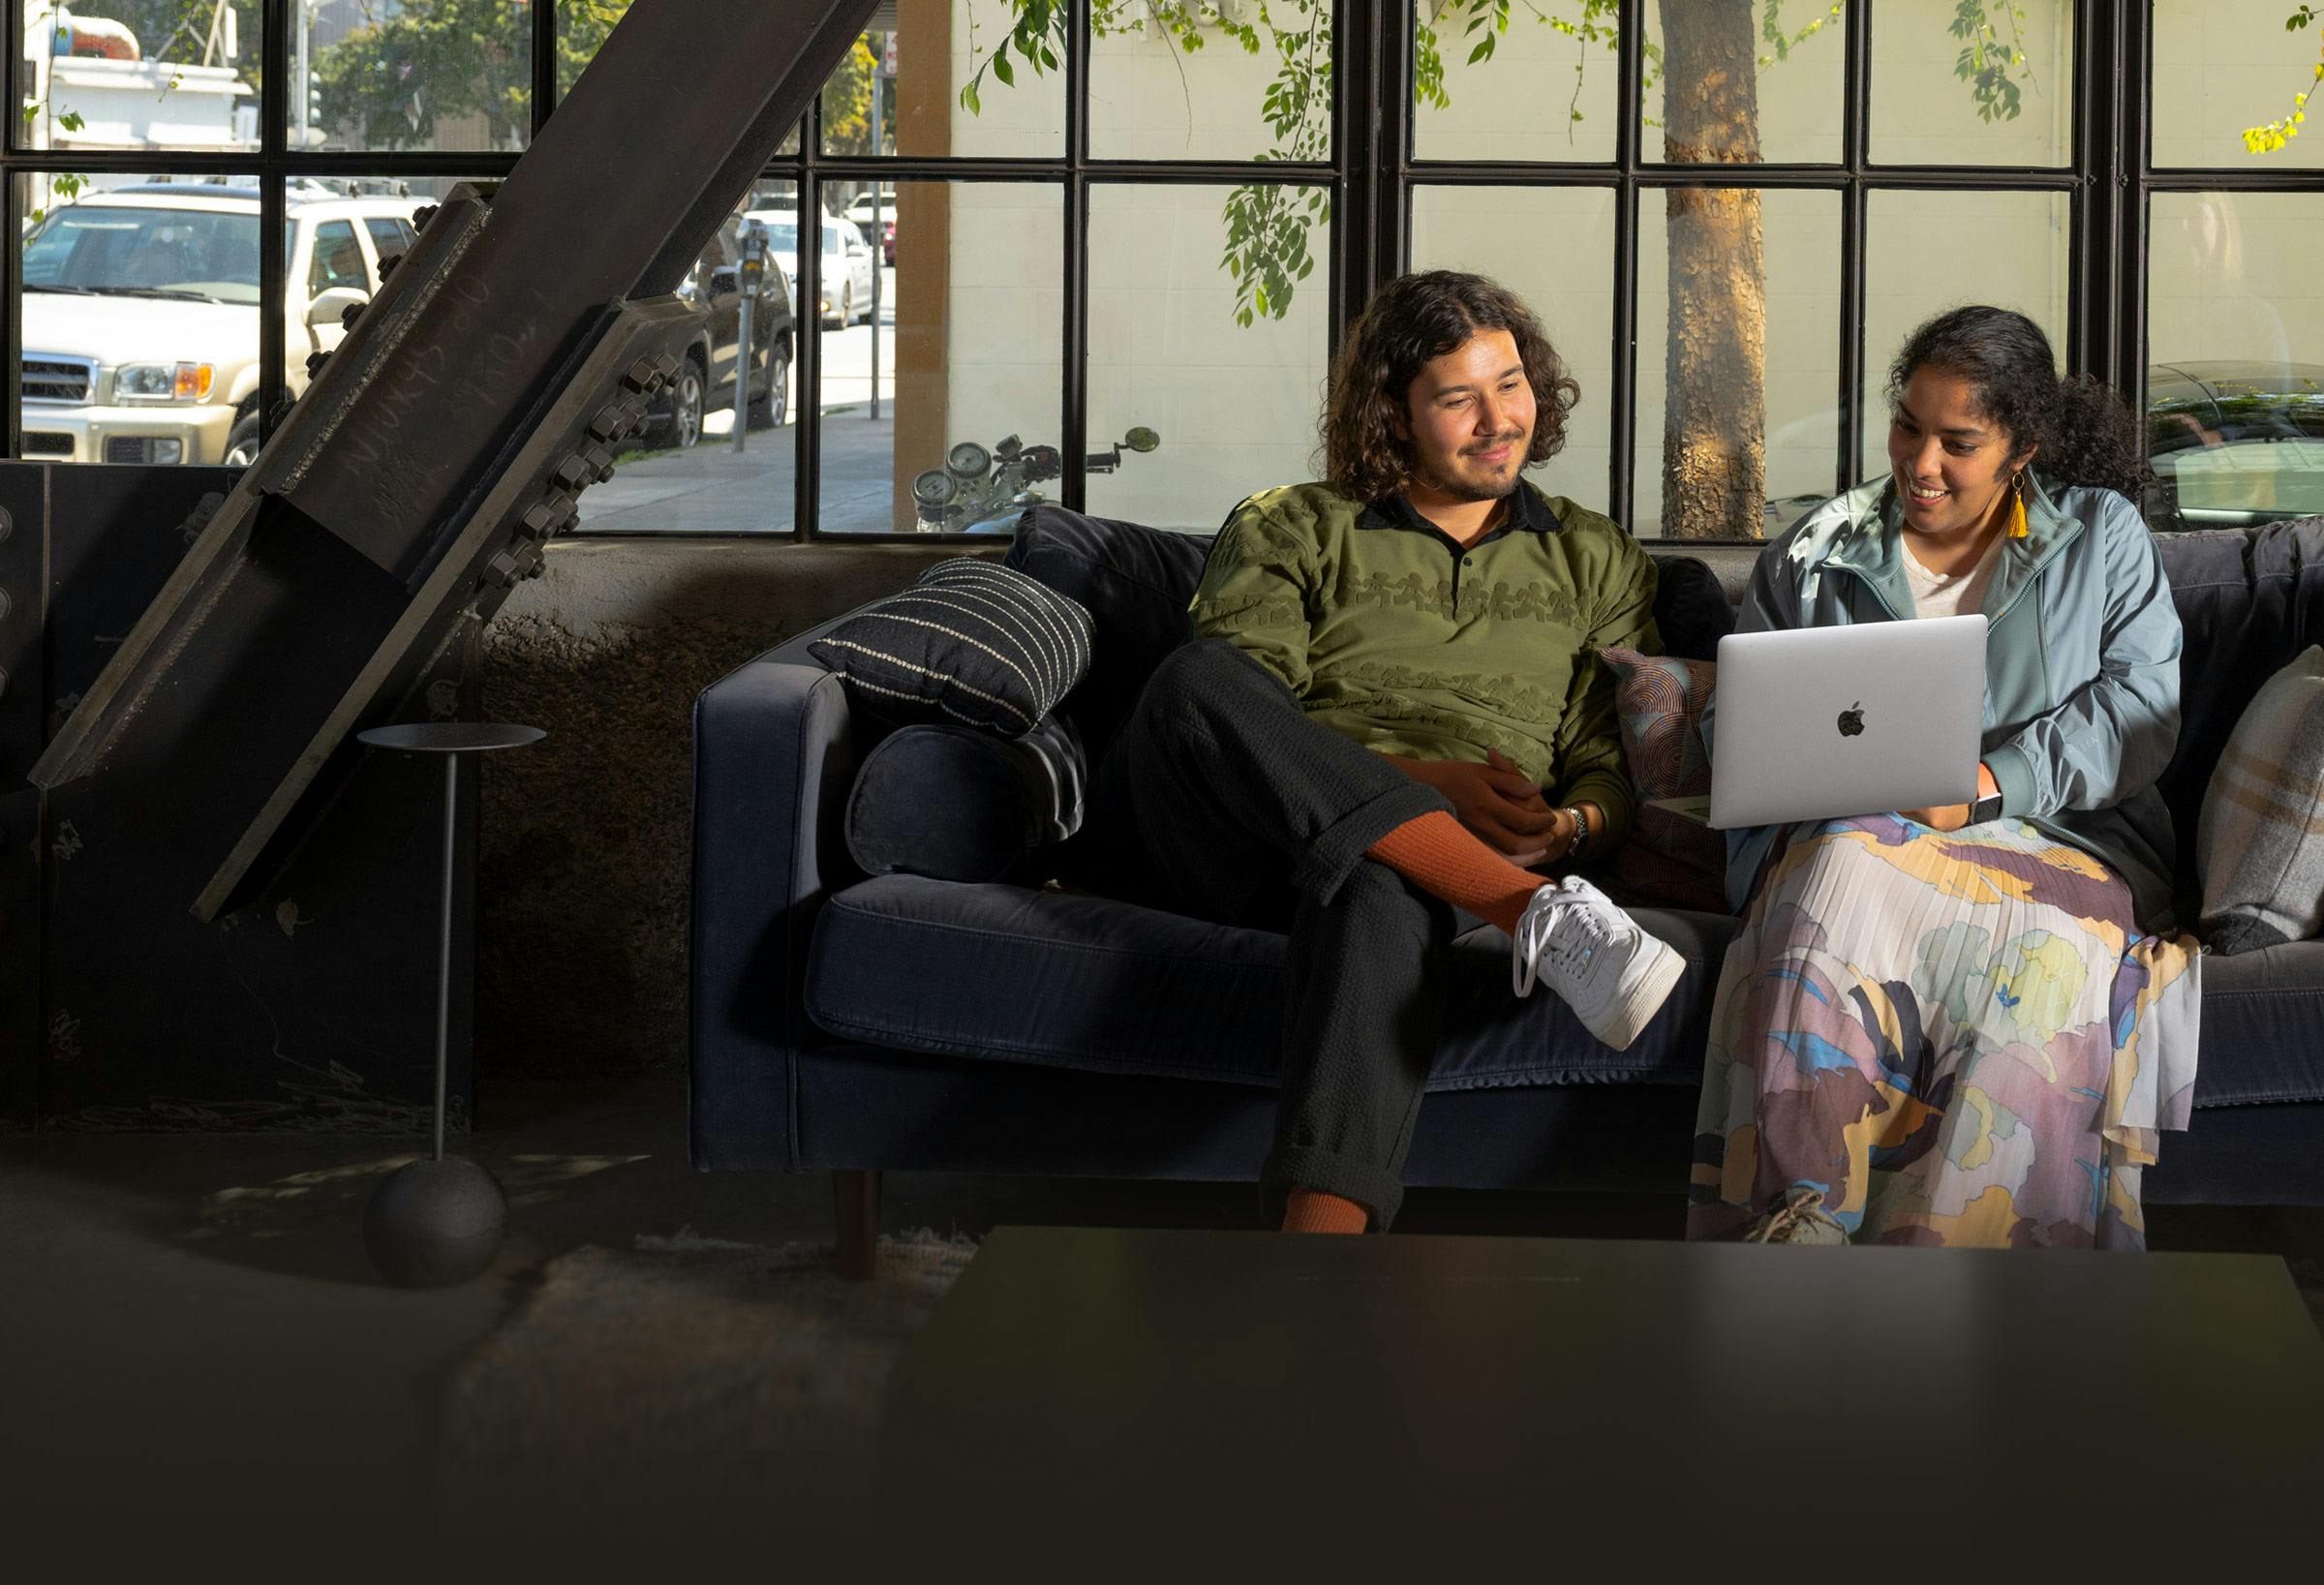 Two Watershed employees sitting on a couch at the San Francisco office, happily looking at a laptop